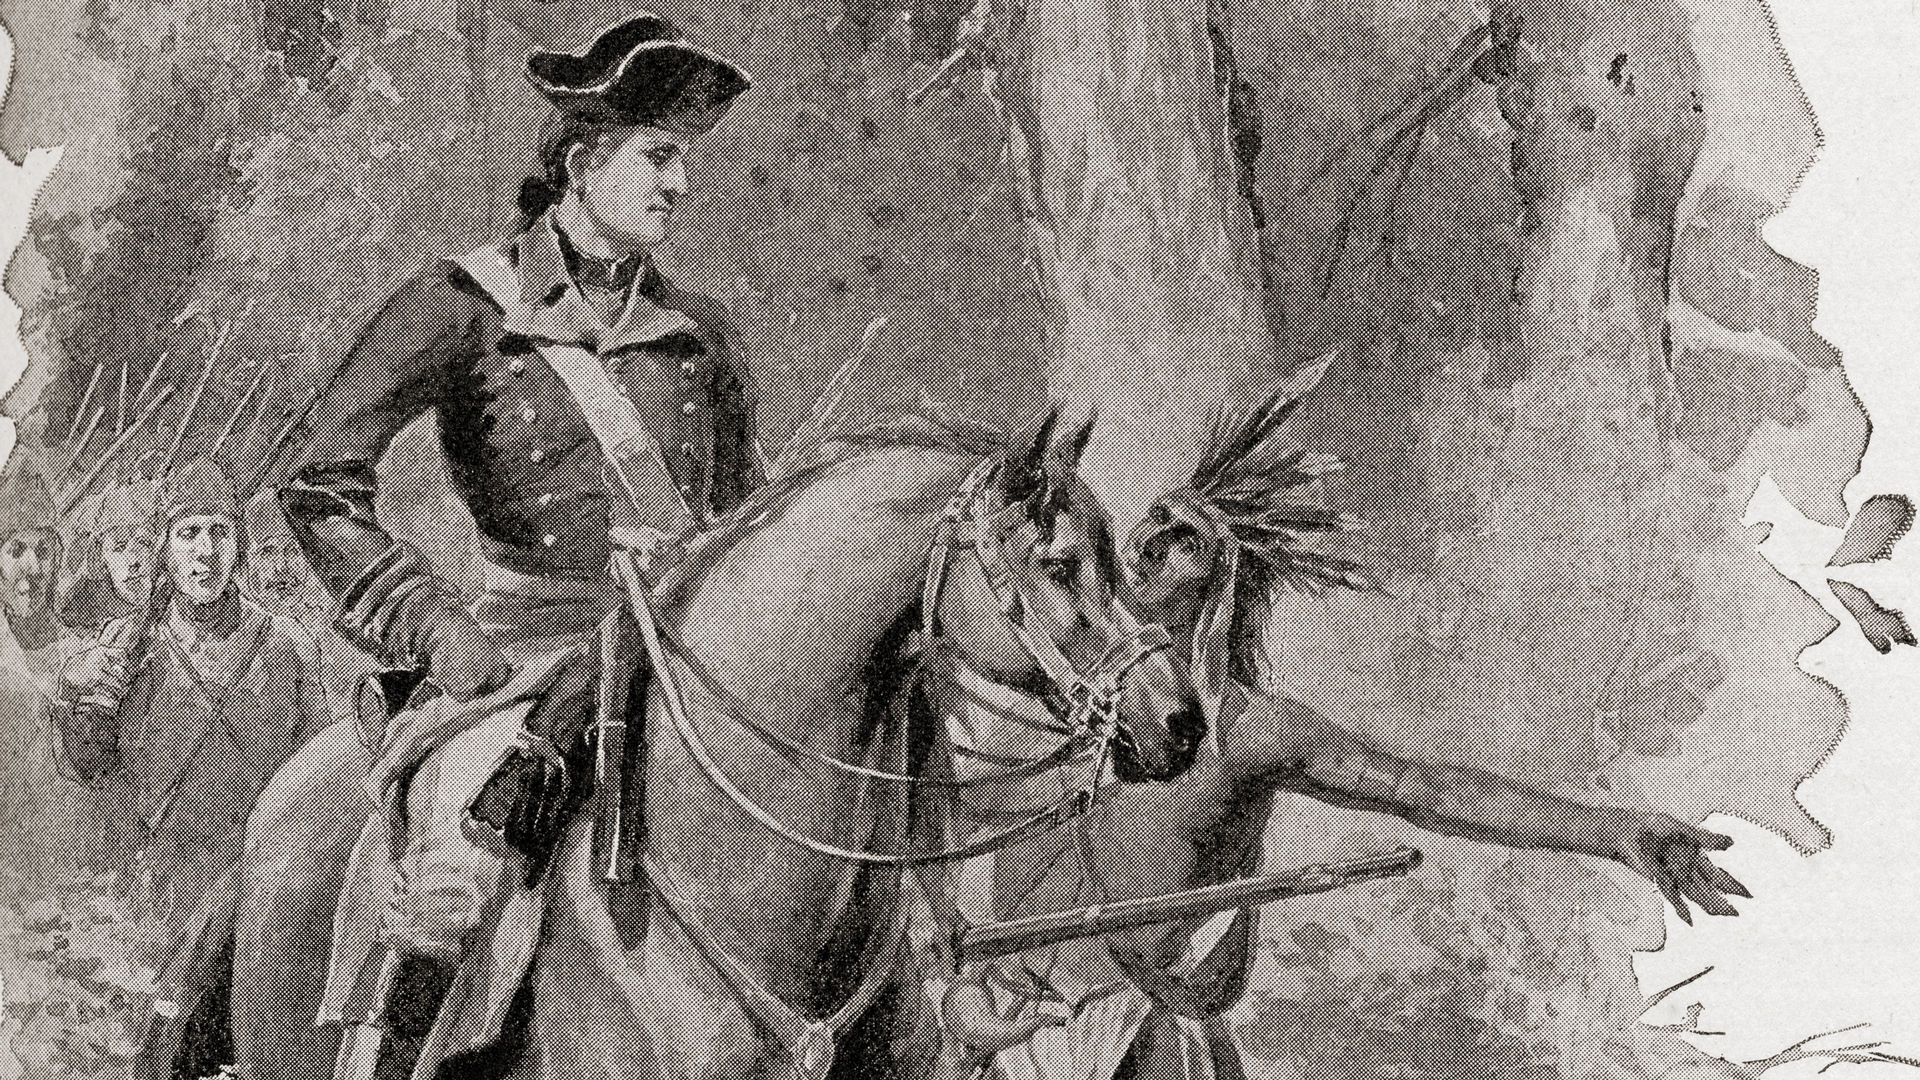 Read More: How 22-Year-Old George Washington Inadvertently Sparked a World War